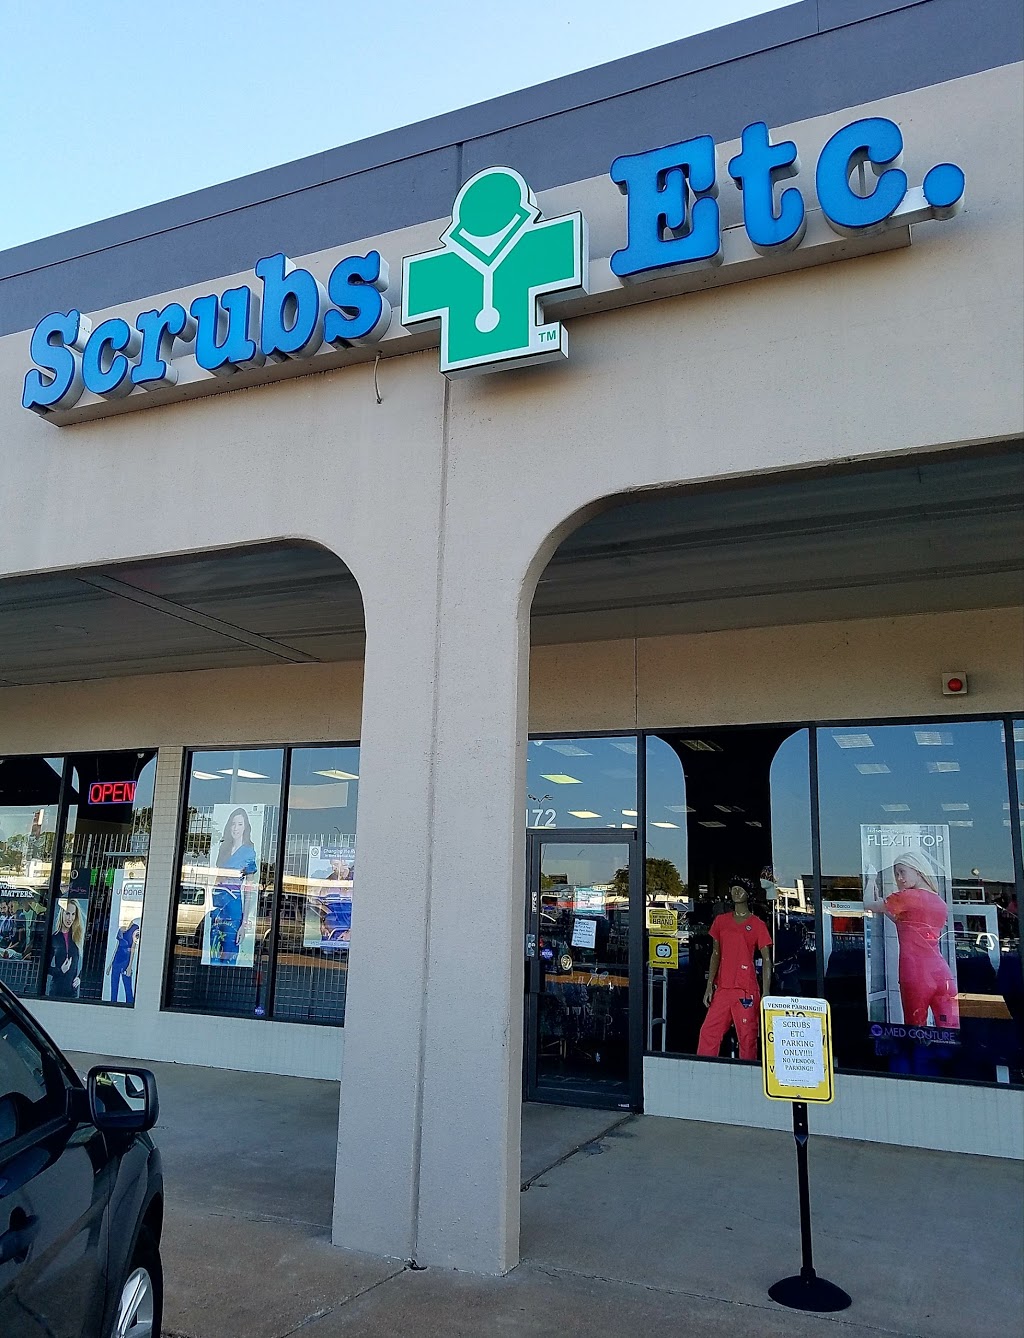 Scrubs Etc - shoe store  | Photo 2 of 2 | Address: 1165 S Stemmons Fwy #172, Lewisville, TX 75067, USA | Phone: (972) 420-9534